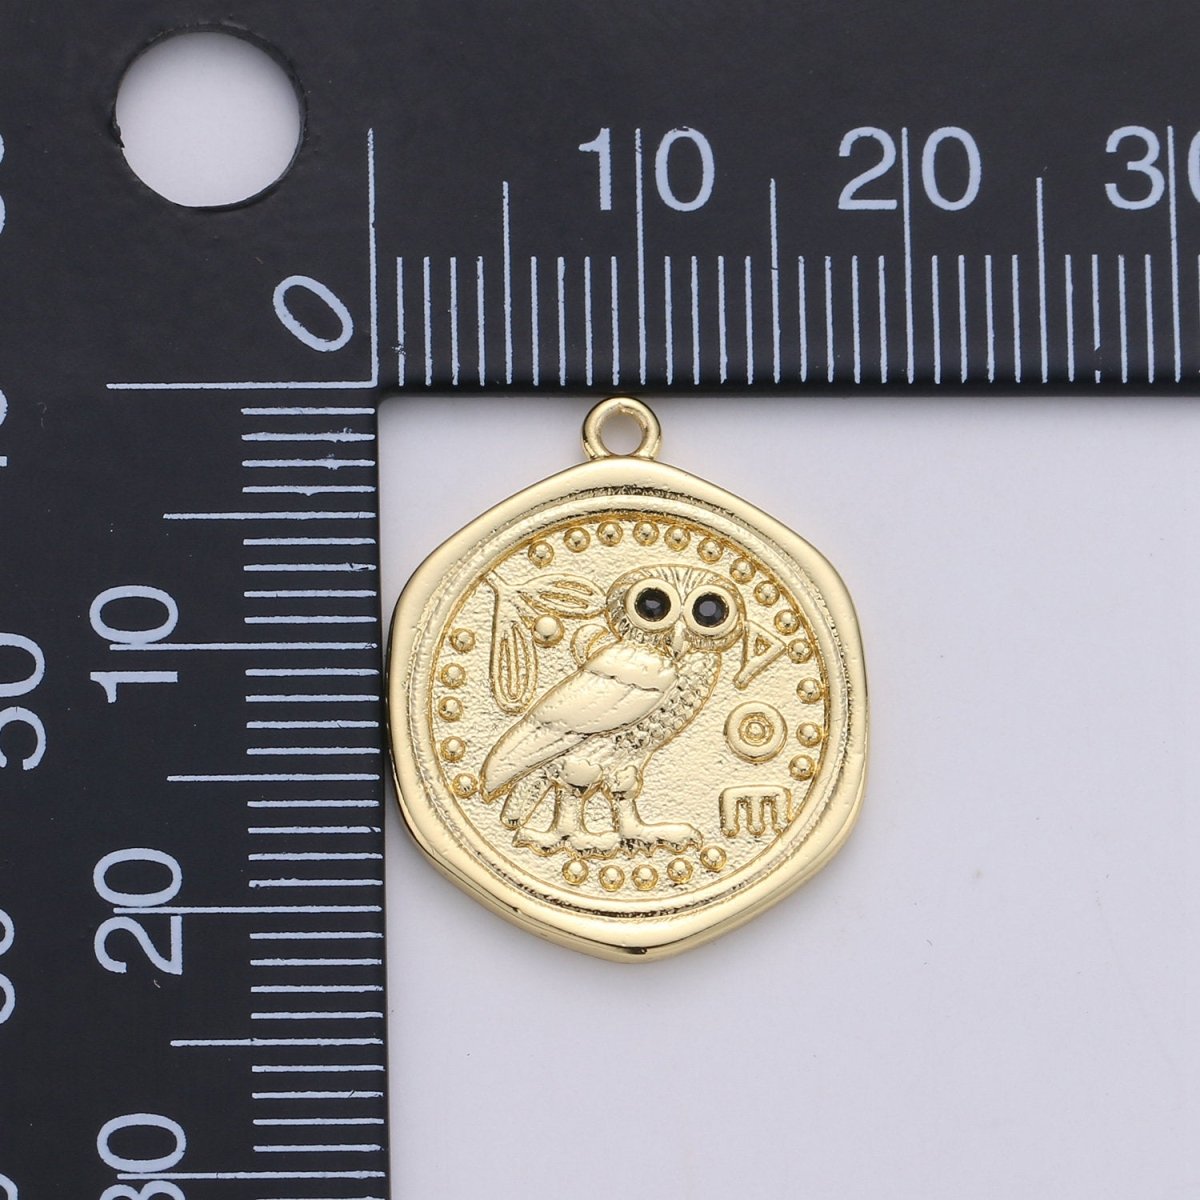 Dainty Owl Medallion Coin Pendant Gold Filled Round Owl Charm Owl Medallion Bird Pendant Charms 22x18mm C-909 - DLUXCA